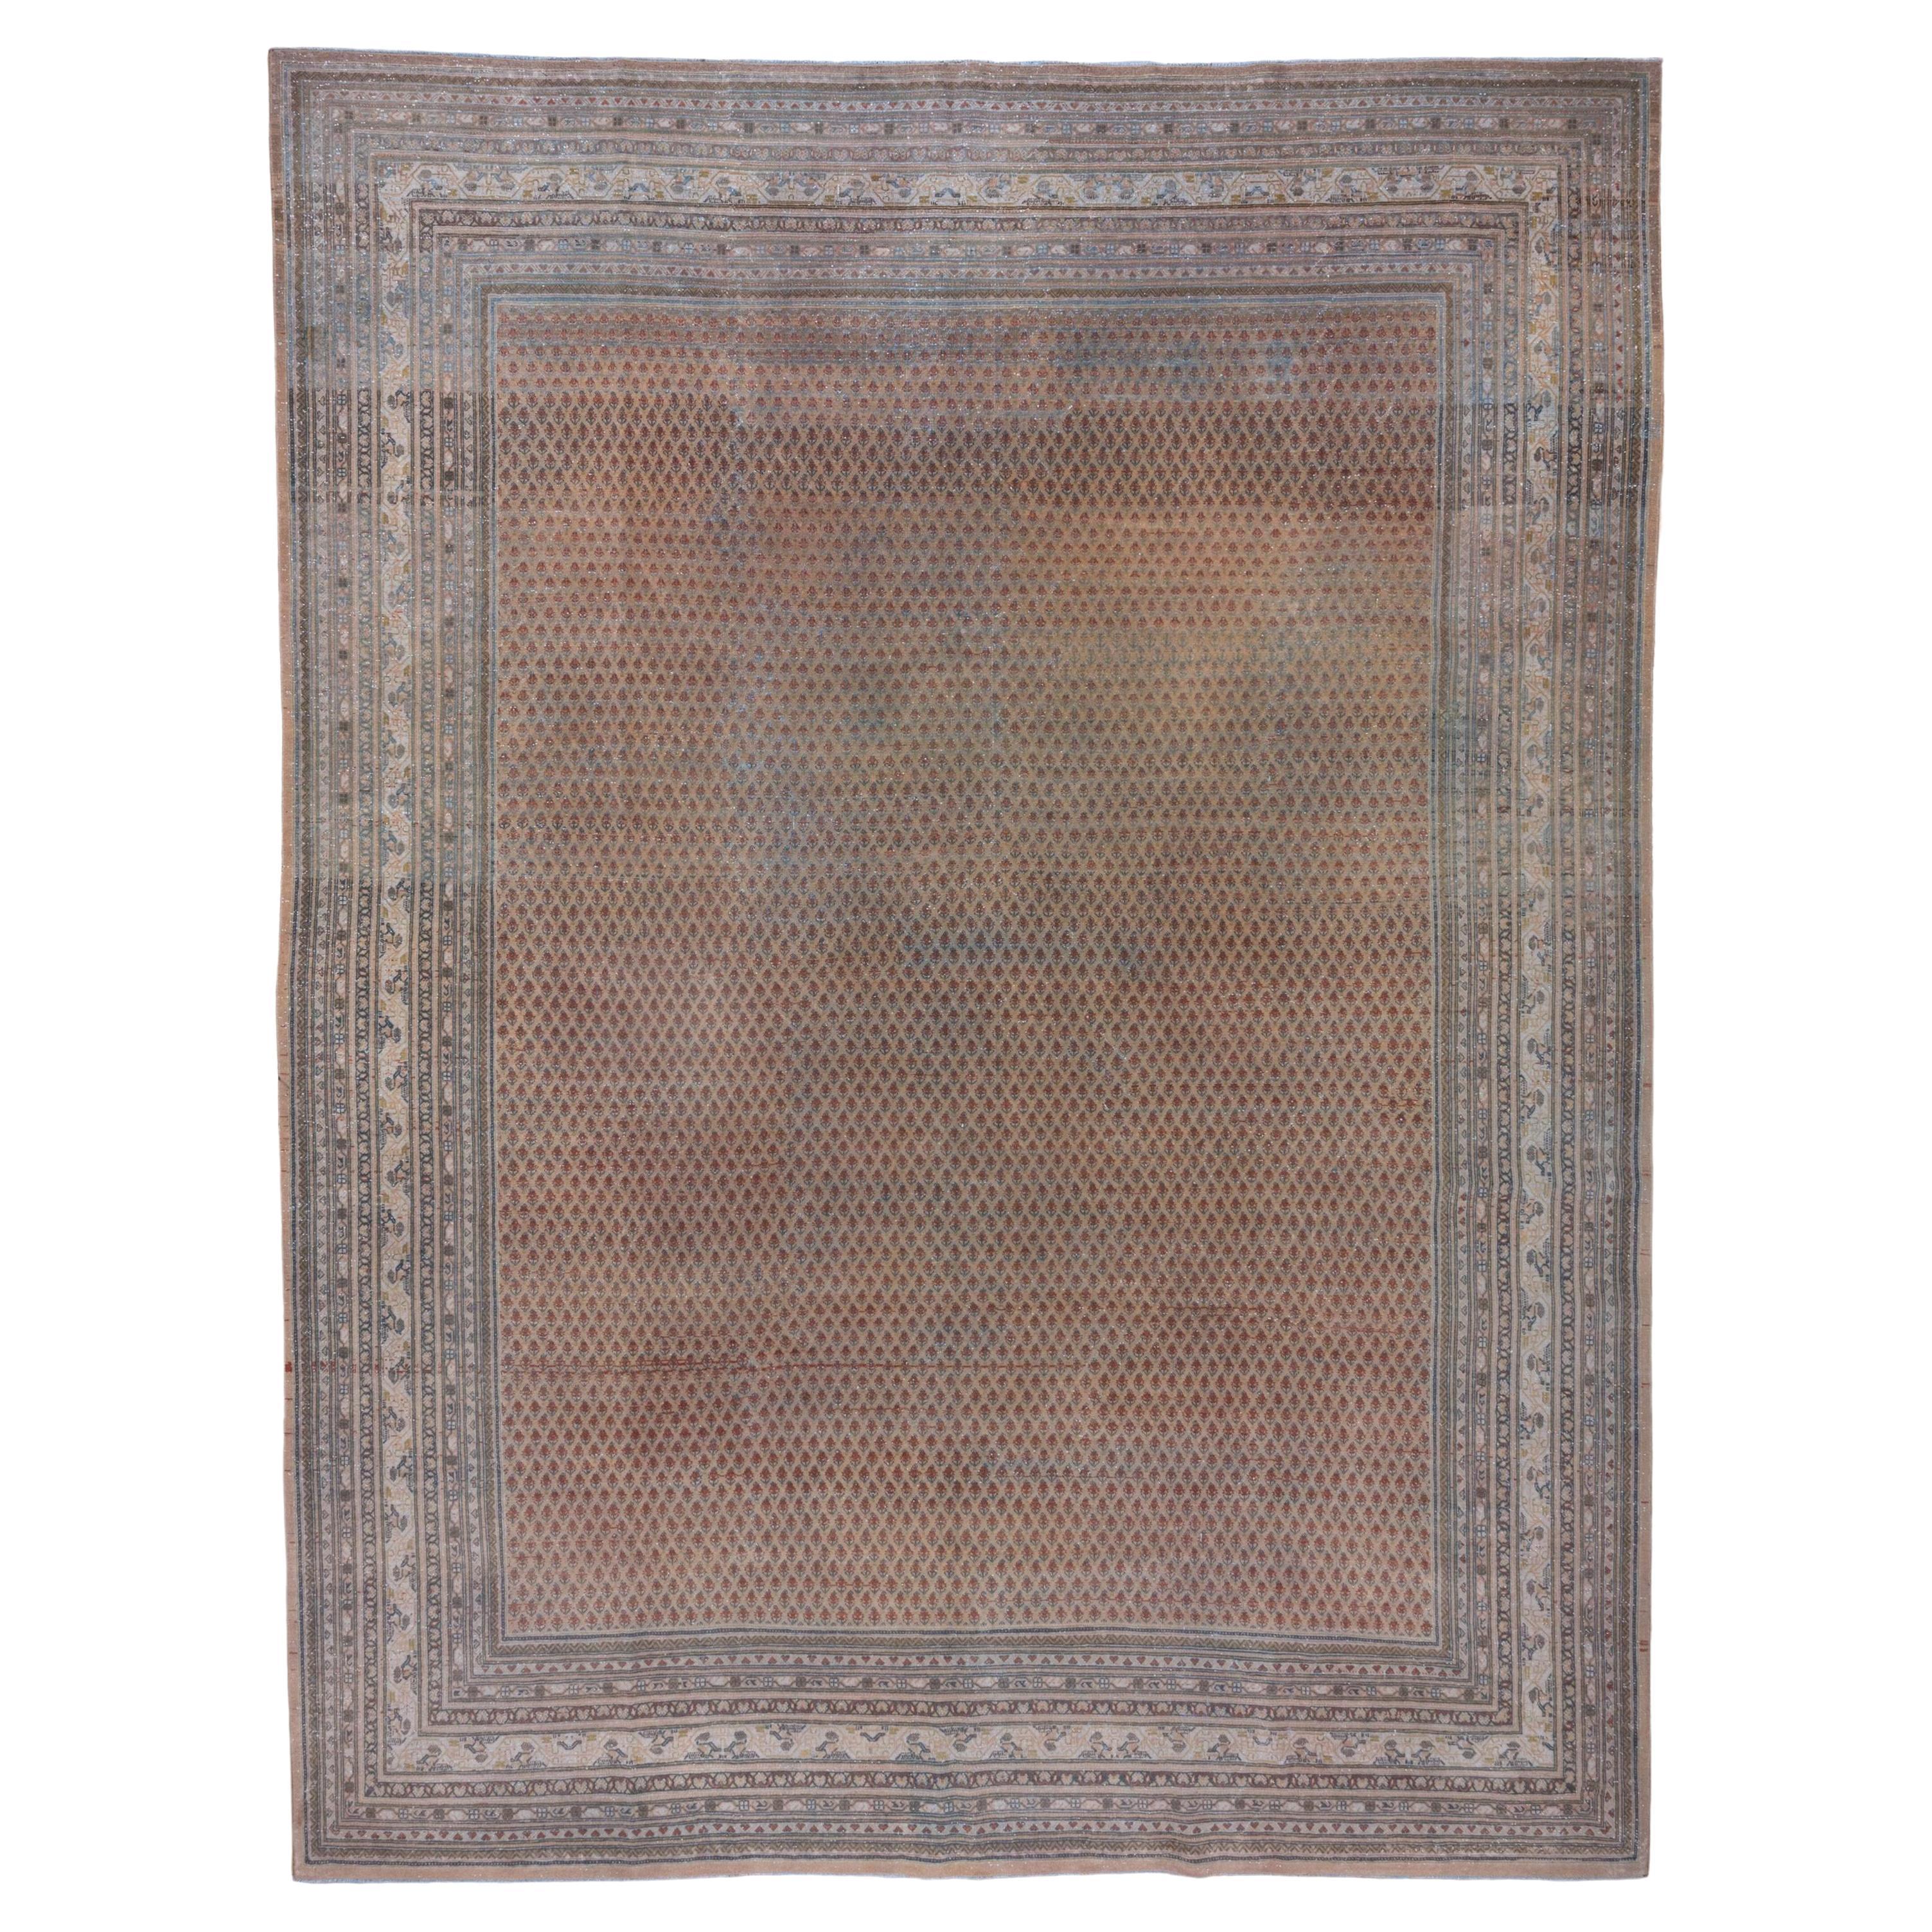 Mid-20th Century Persian Saraband Carpet, Light Brown Field, Blue & Red Accents For Sale